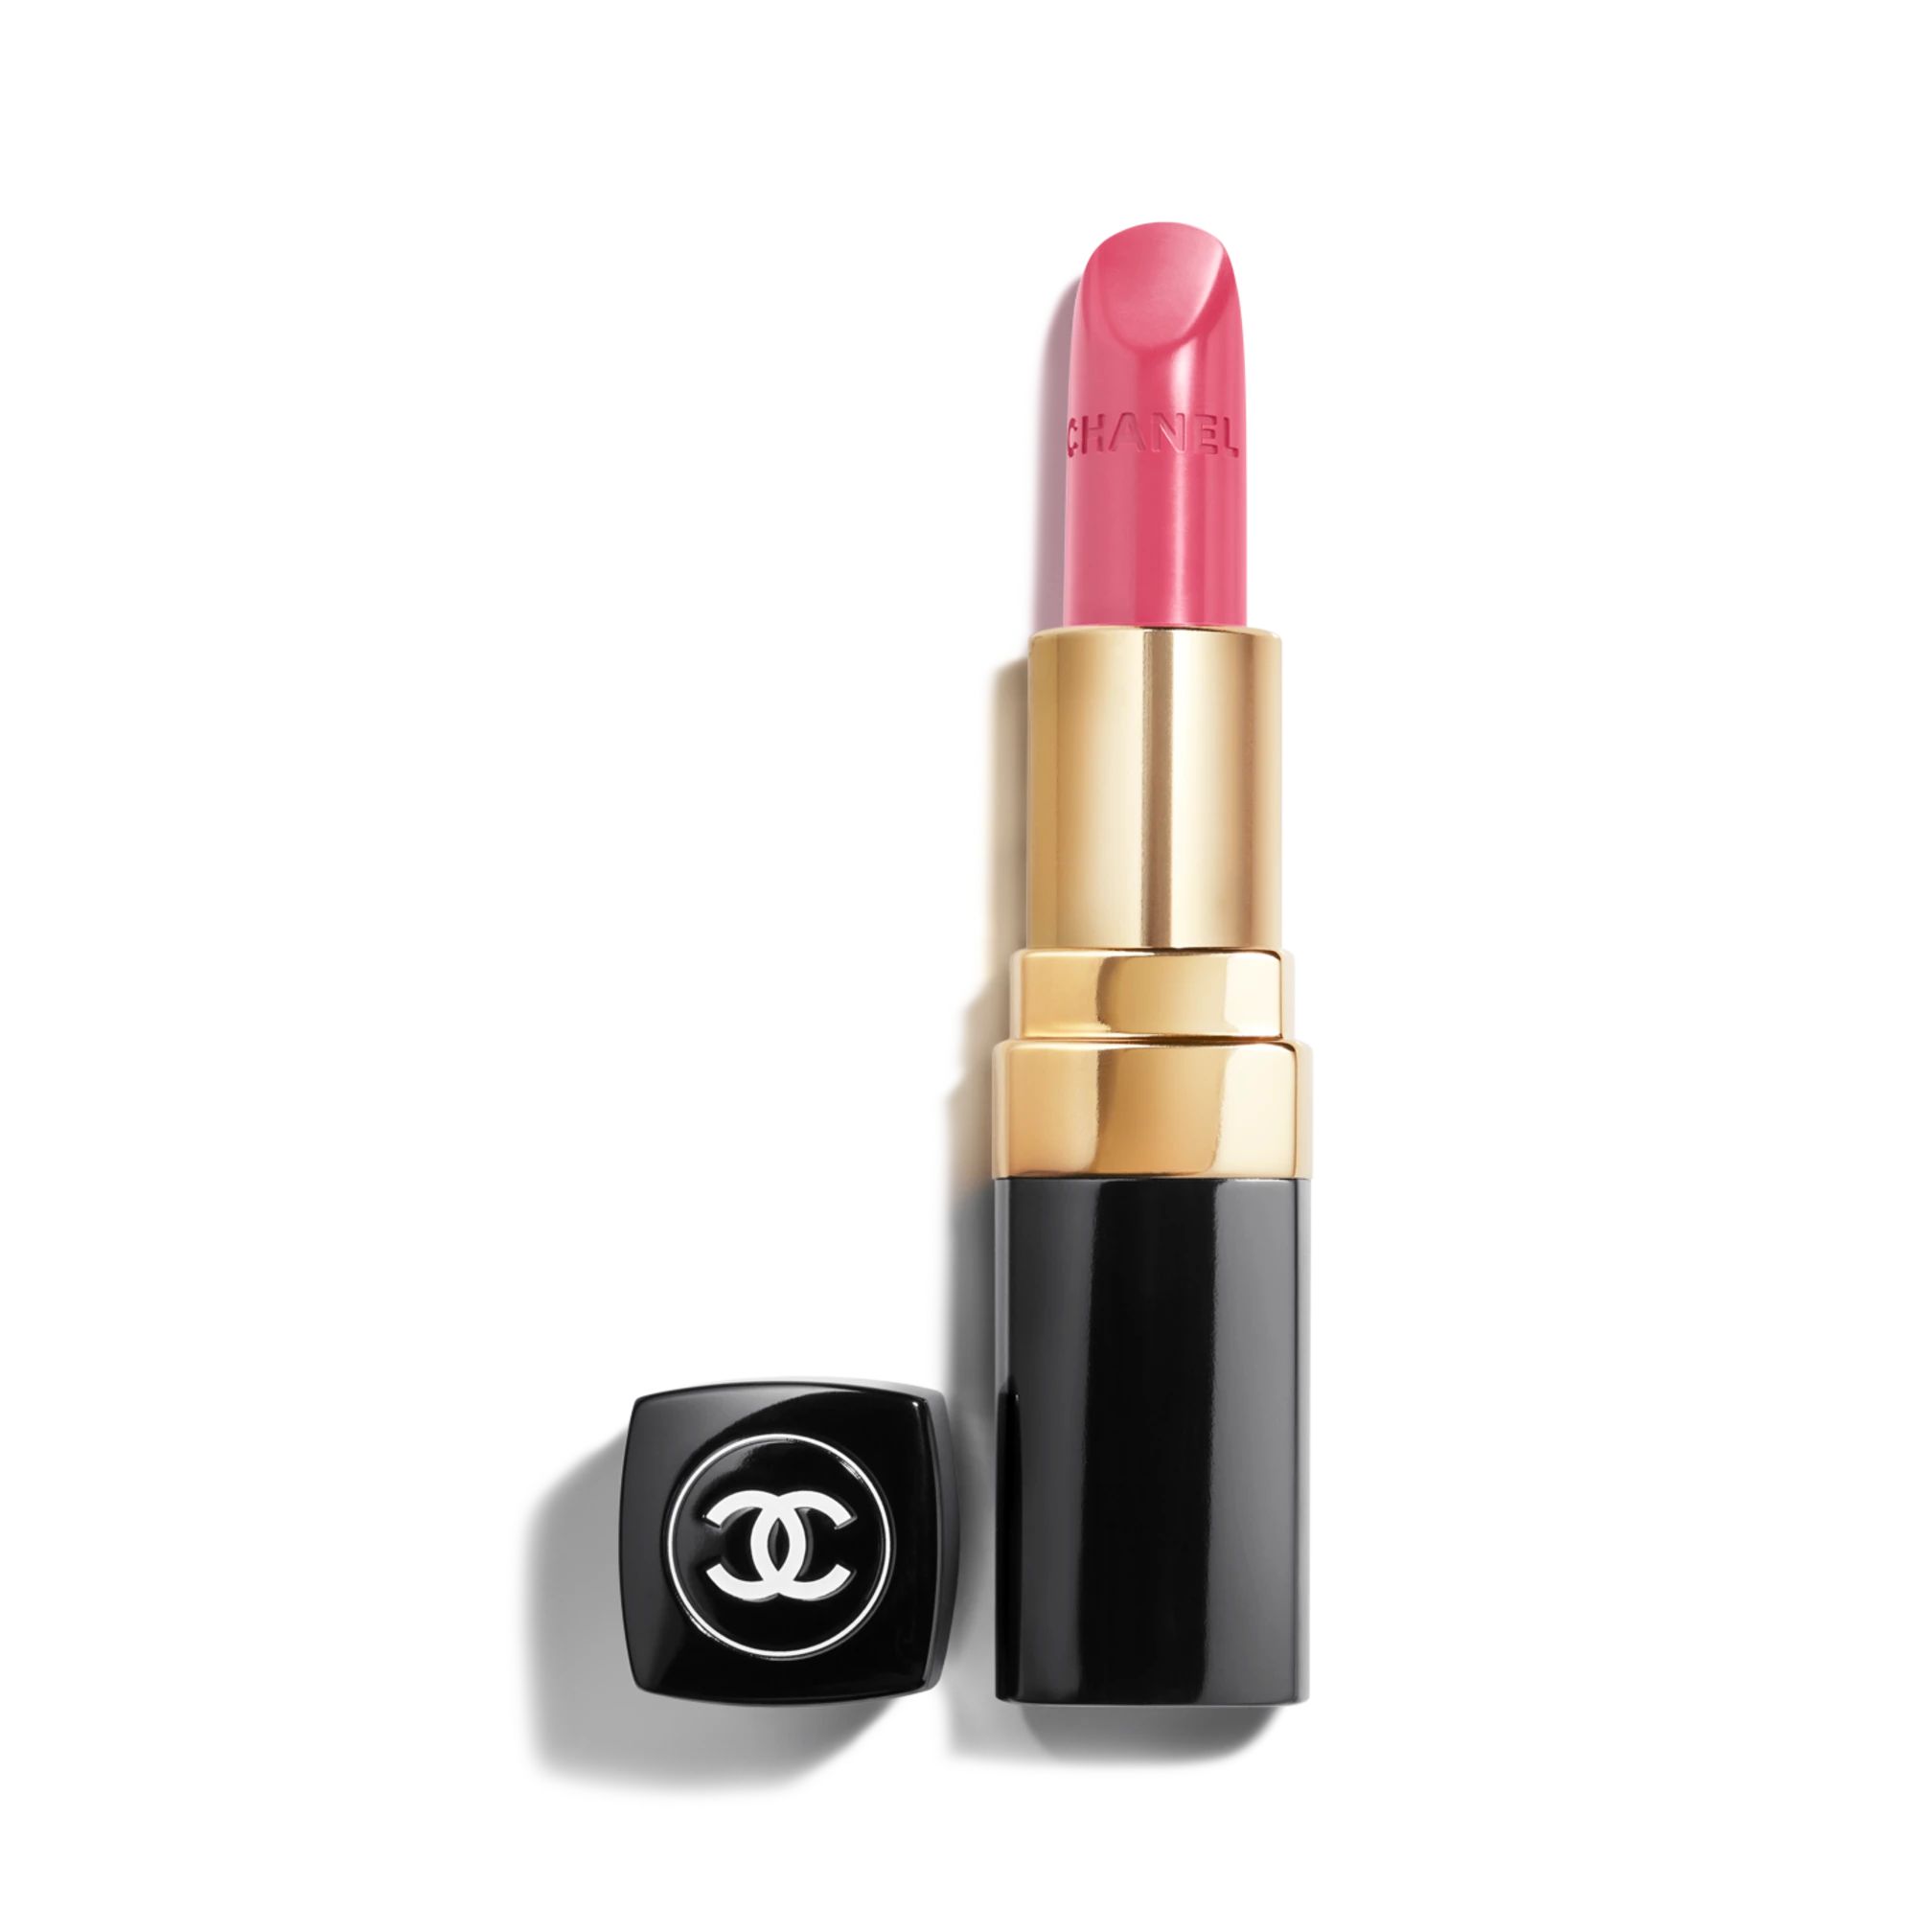 ROUGE COCO | Chanel, Inc. (US)